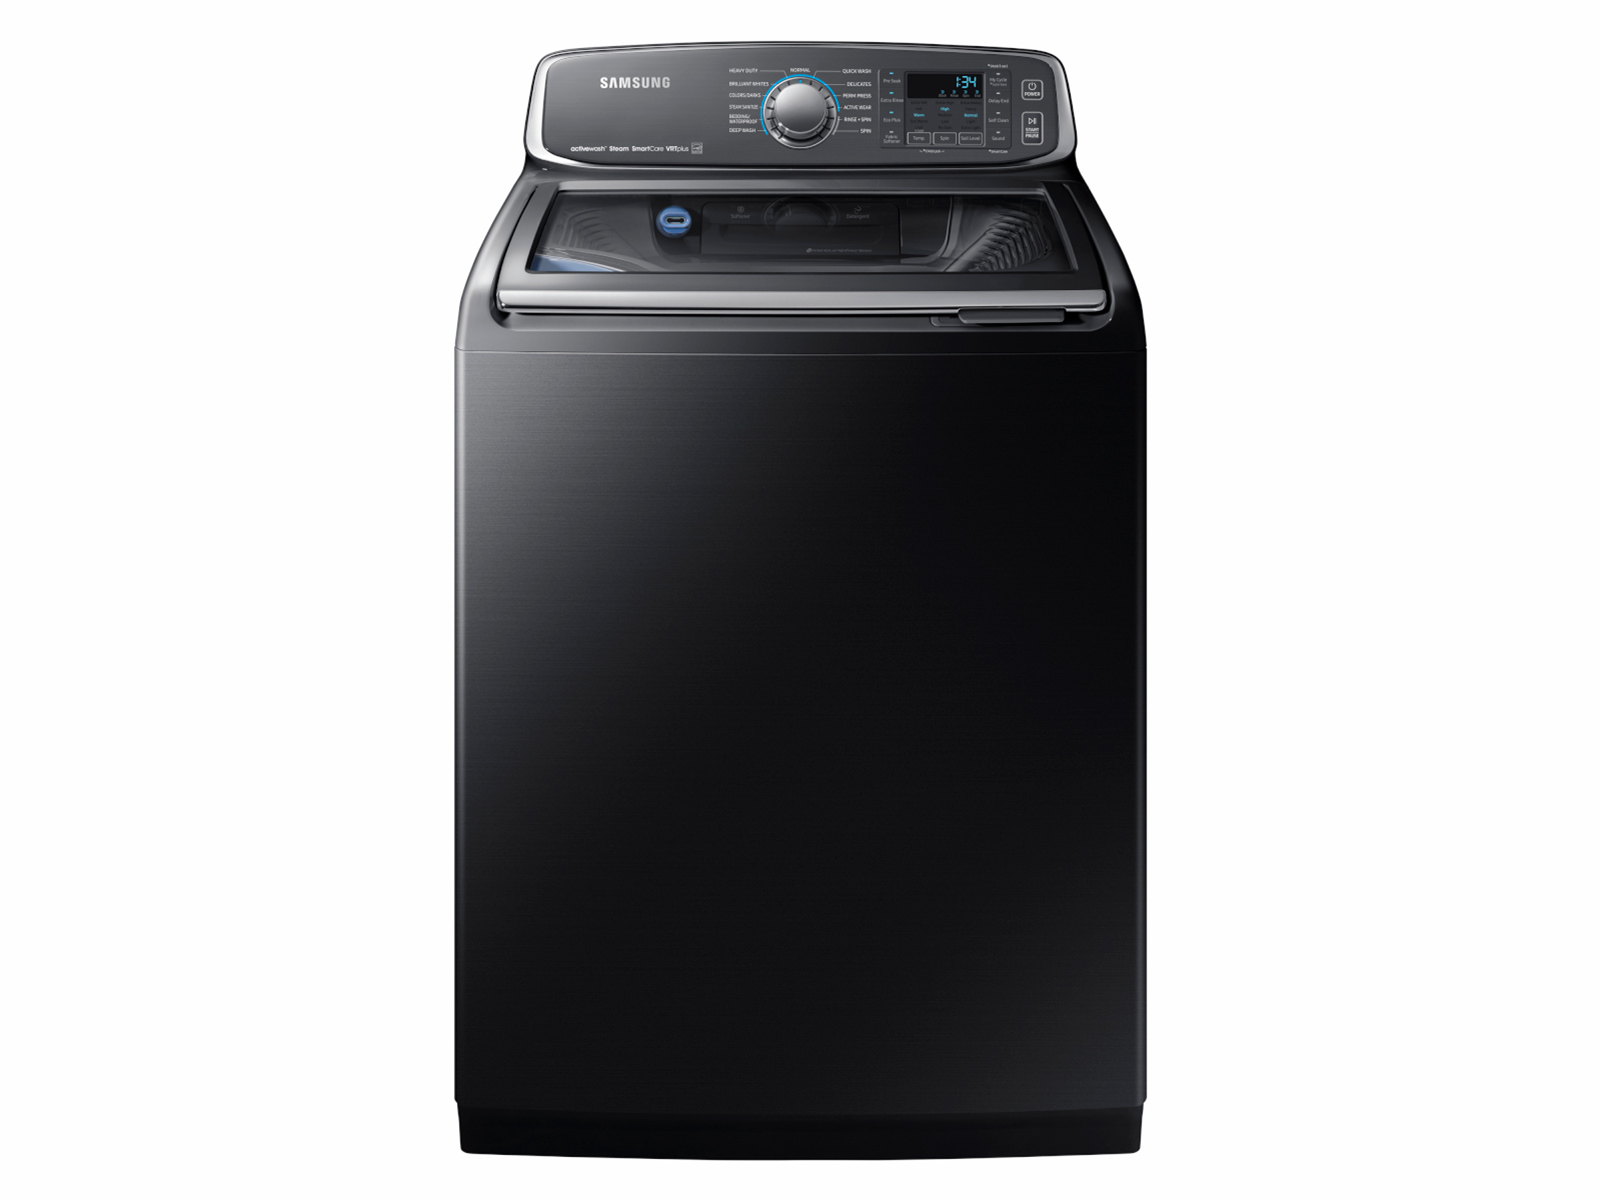 5.2 ft. activewash™ Top Load Washer in Black Stainless Steel Washer - WA52M7750AV/A4 | Samsung US